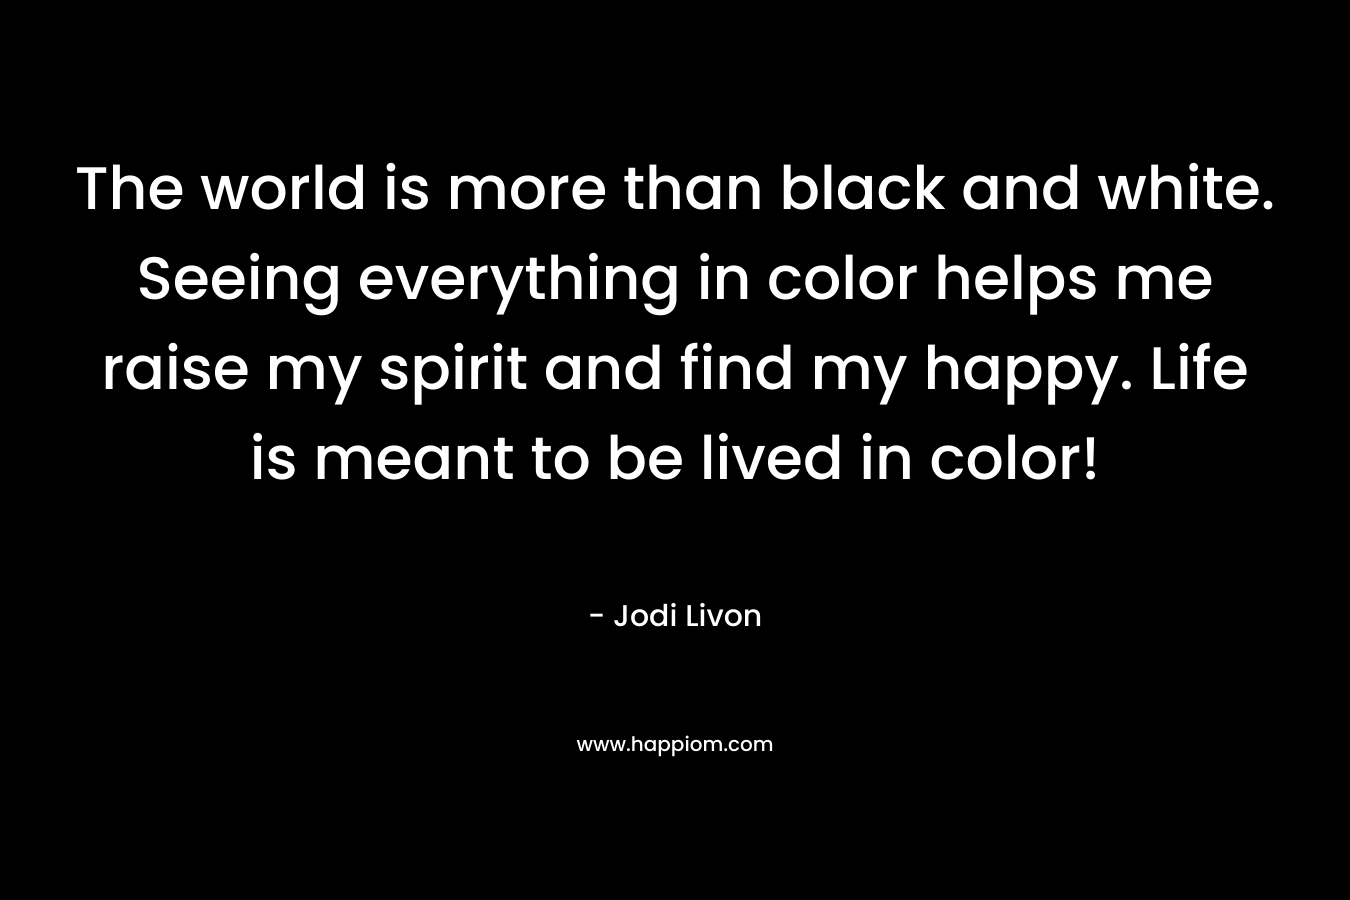 The world is more than black and white. Seeing everything in color helps me raise my spirit and find my happy. Life is meant to be lived in color!